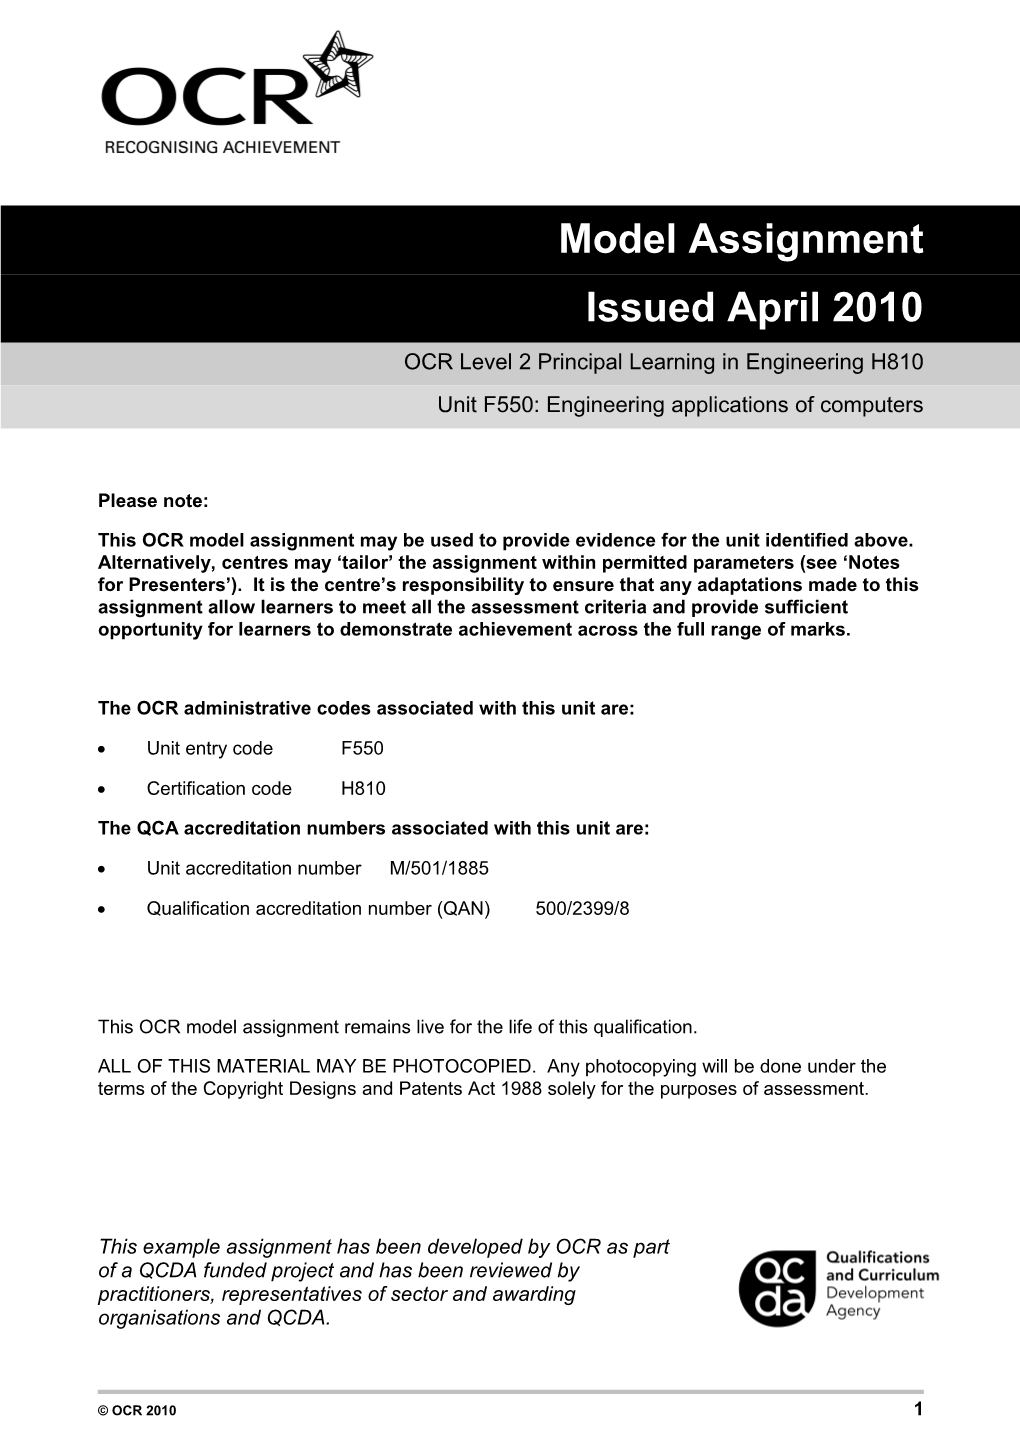 OCR Principal Learning Model Assignment